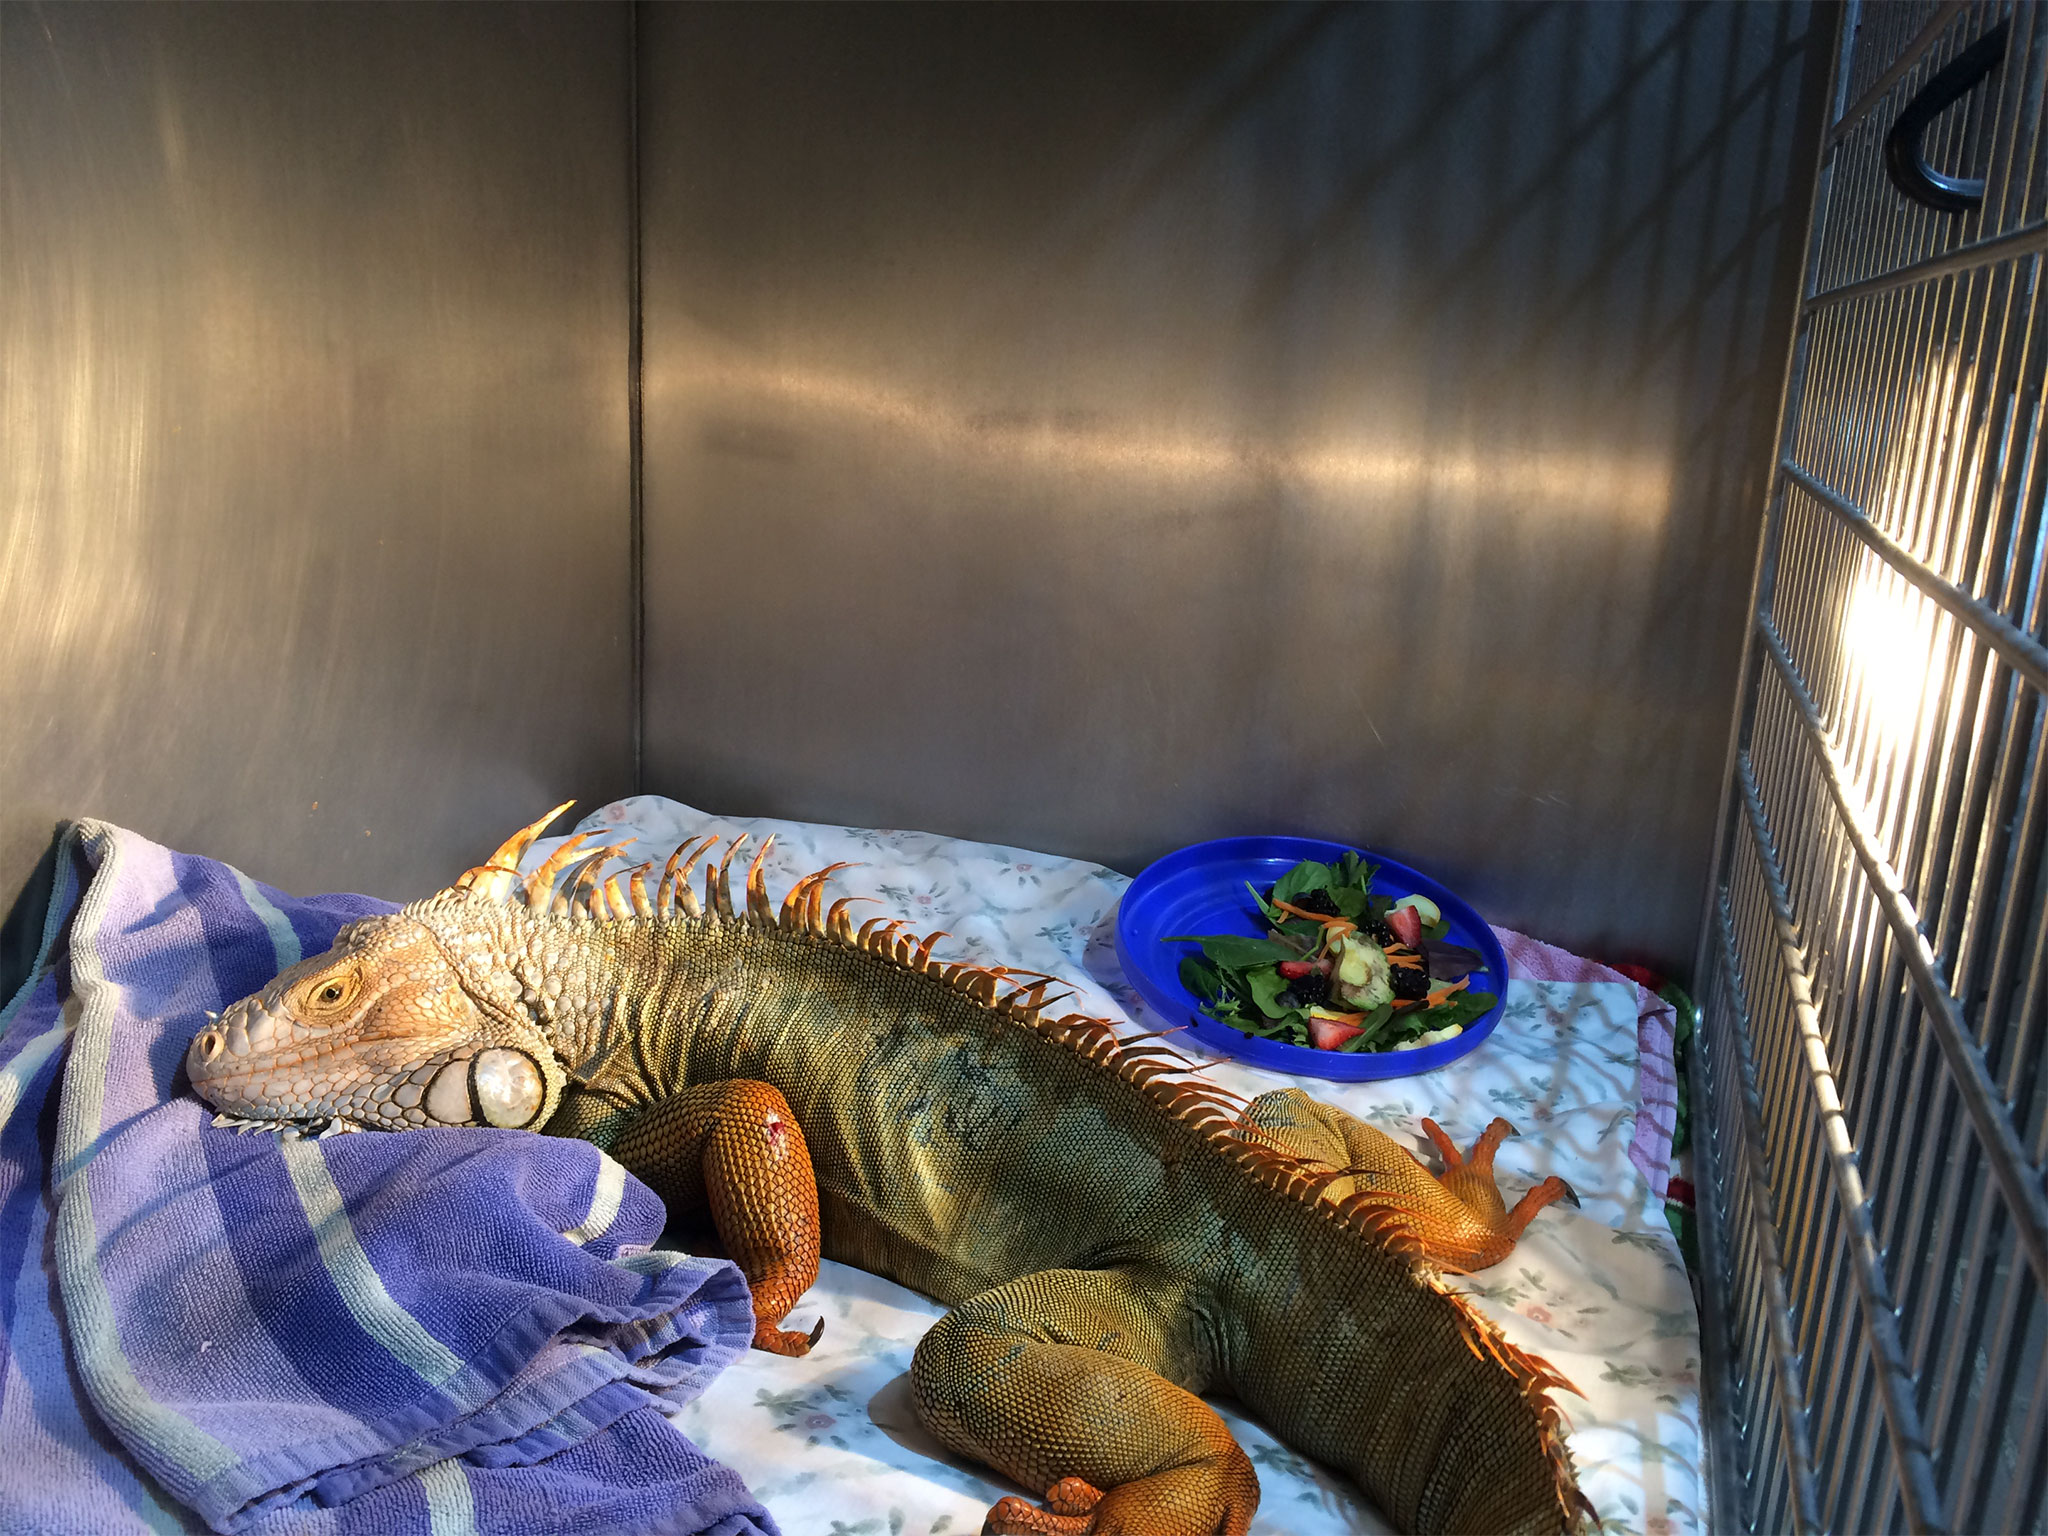 6-Foot Iguana Shot With Crossbow Rescued in Florida